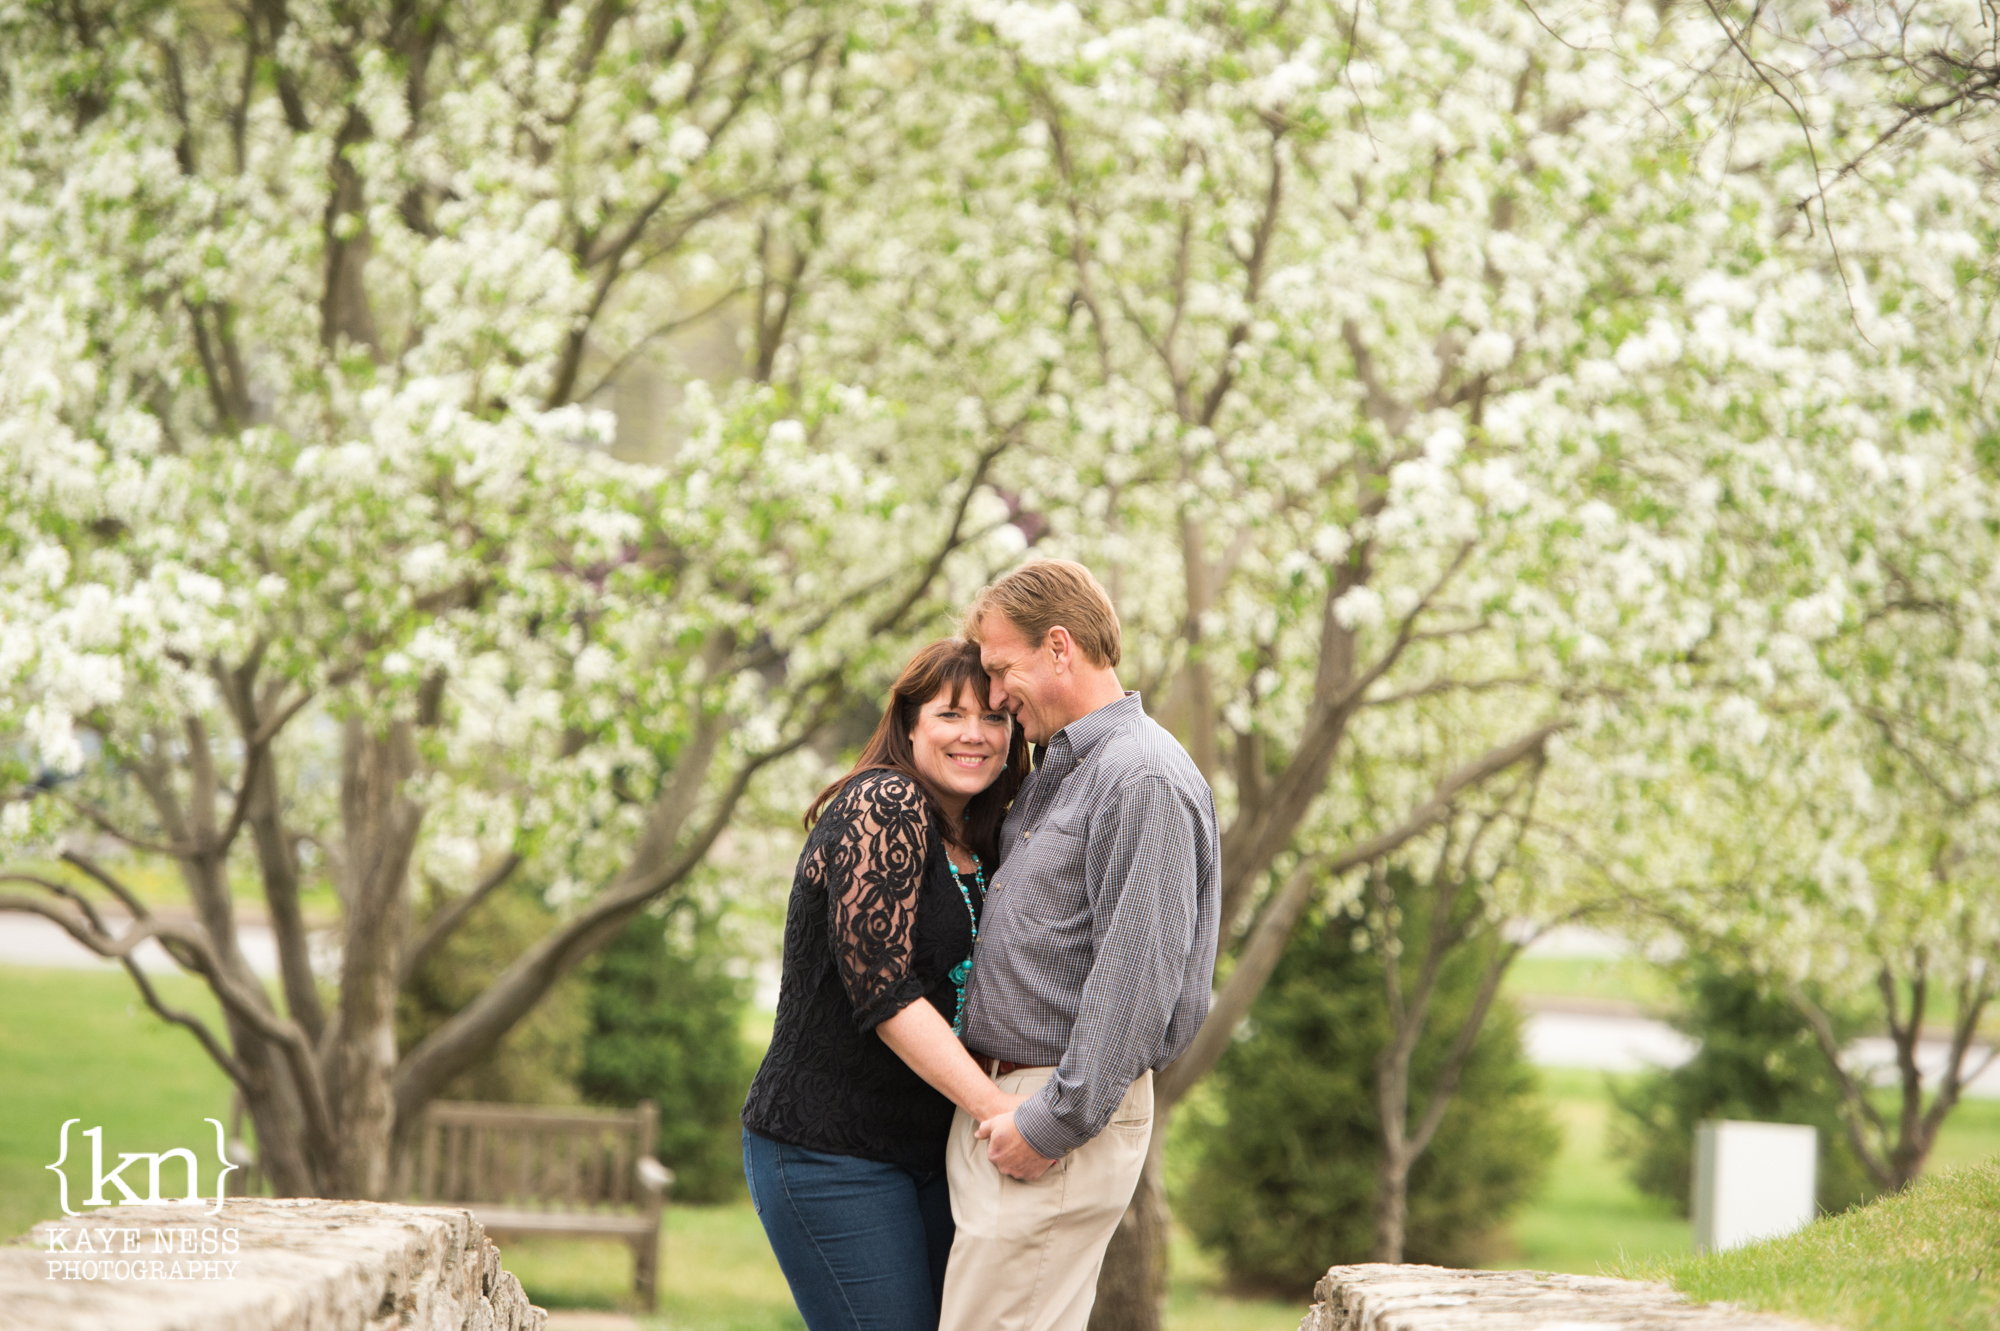 spring engagement photography ideas